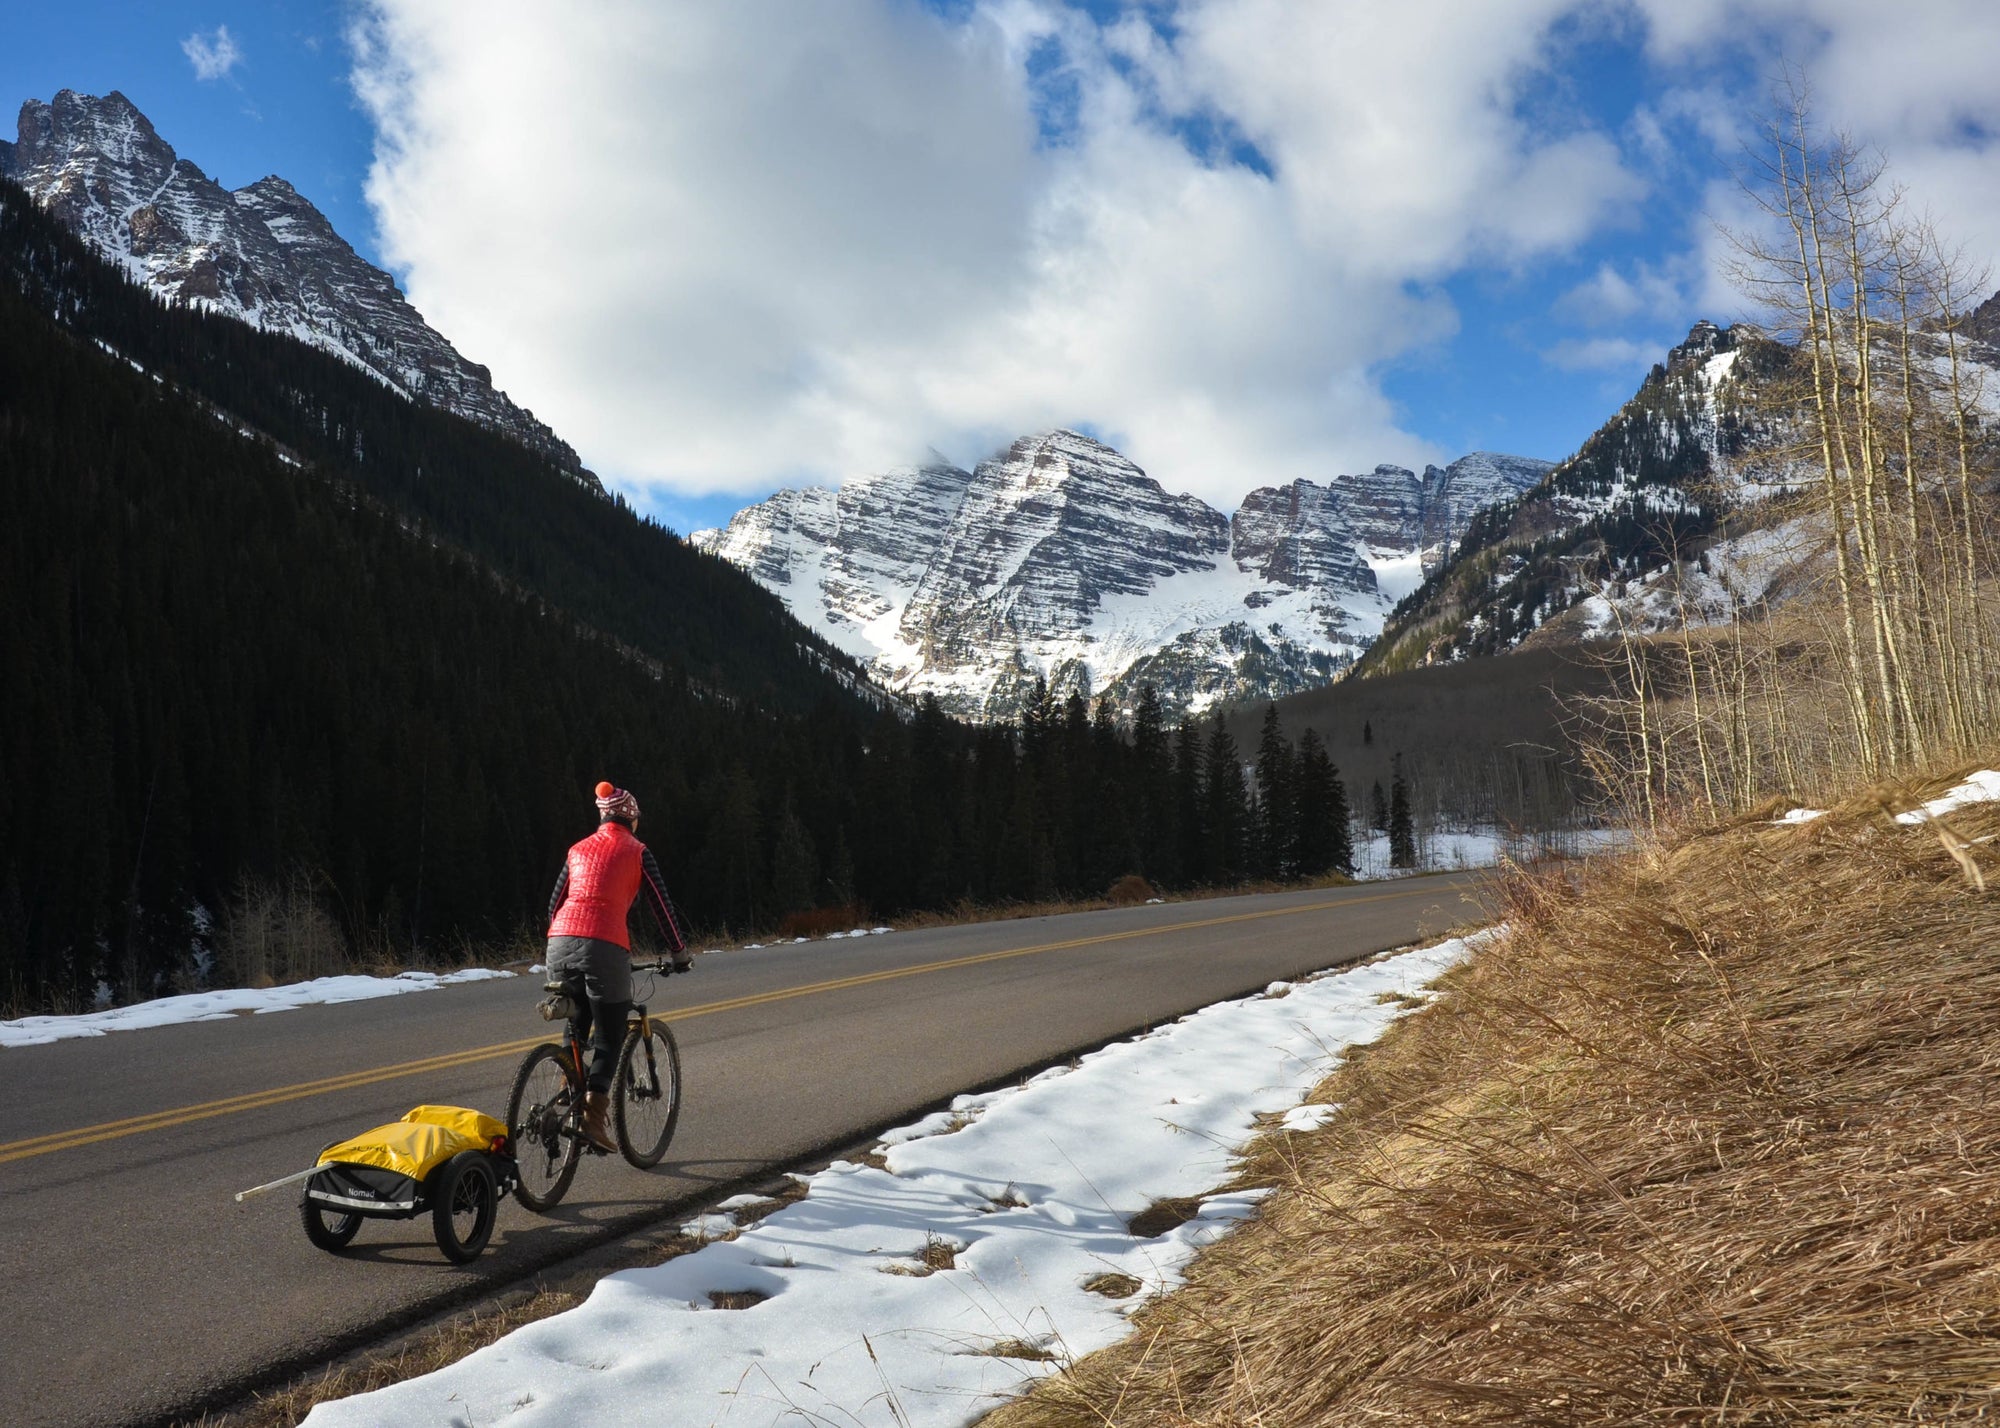 cyclist riding on mountain road with cargo bike trailer in tow. snowy mountain in background